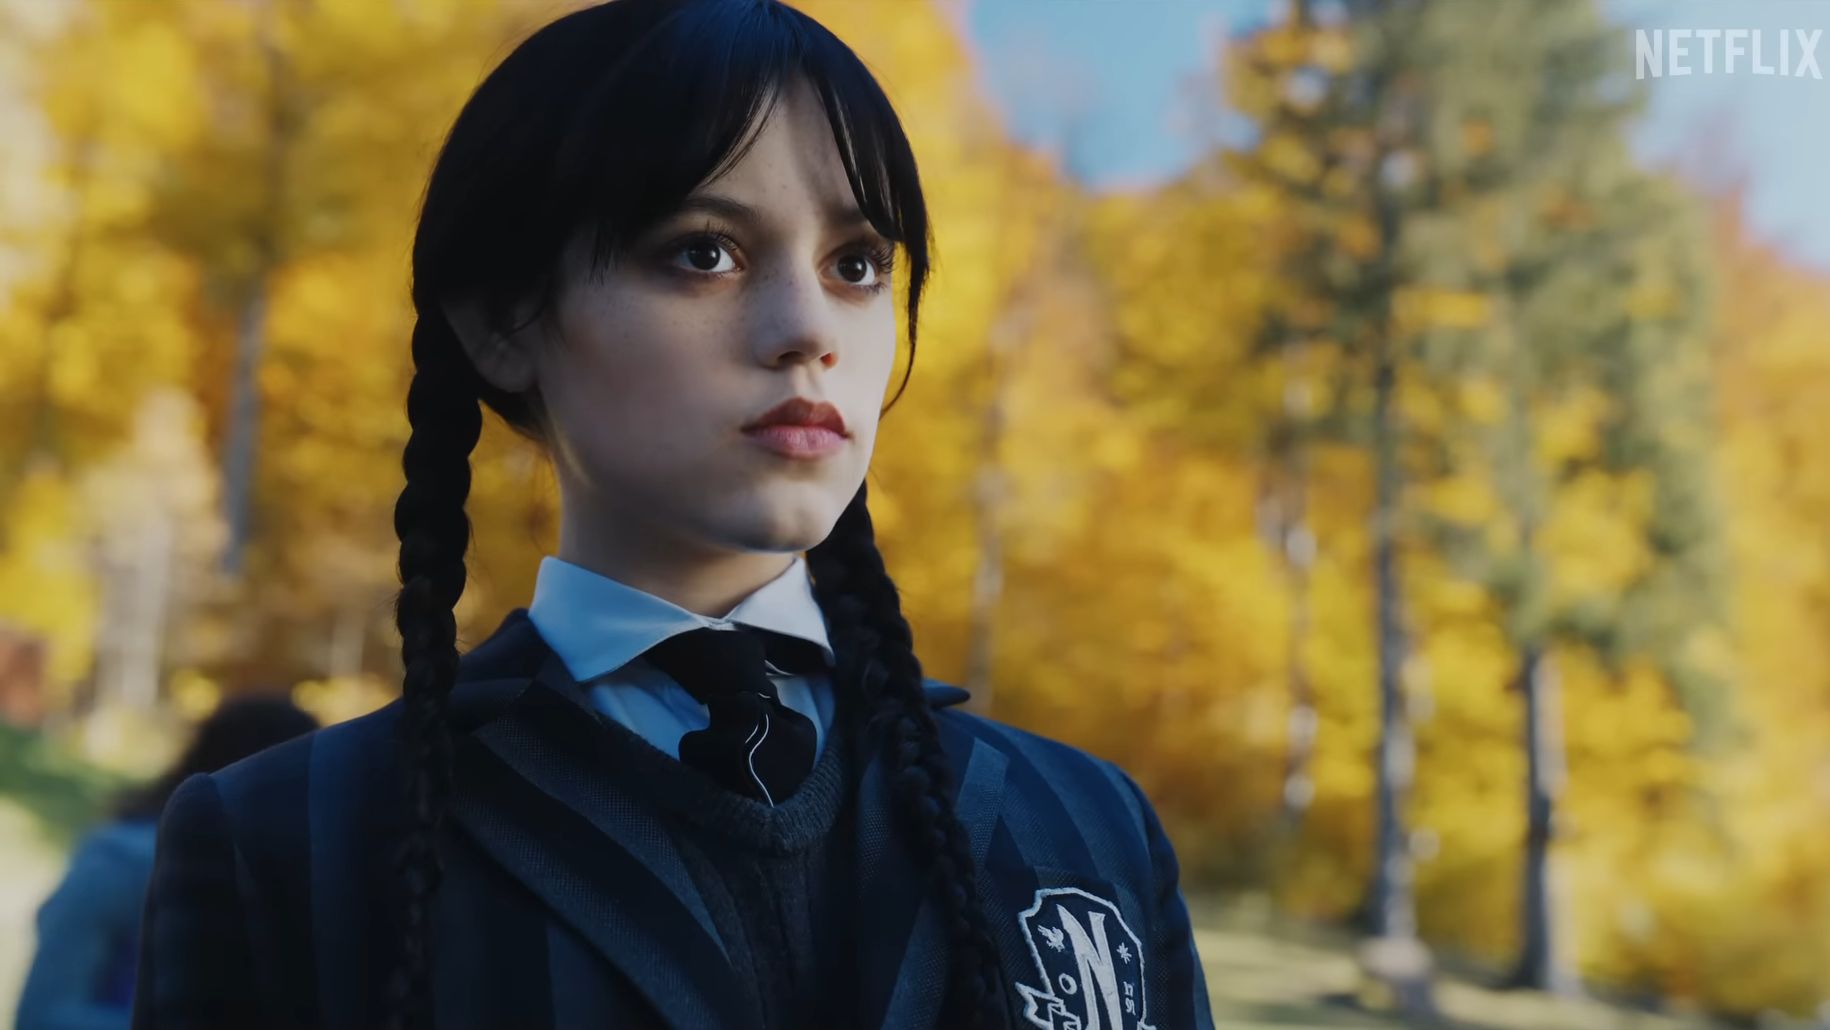 Wednesday: Trailer for the evil Addams Family spin-off on Netflix